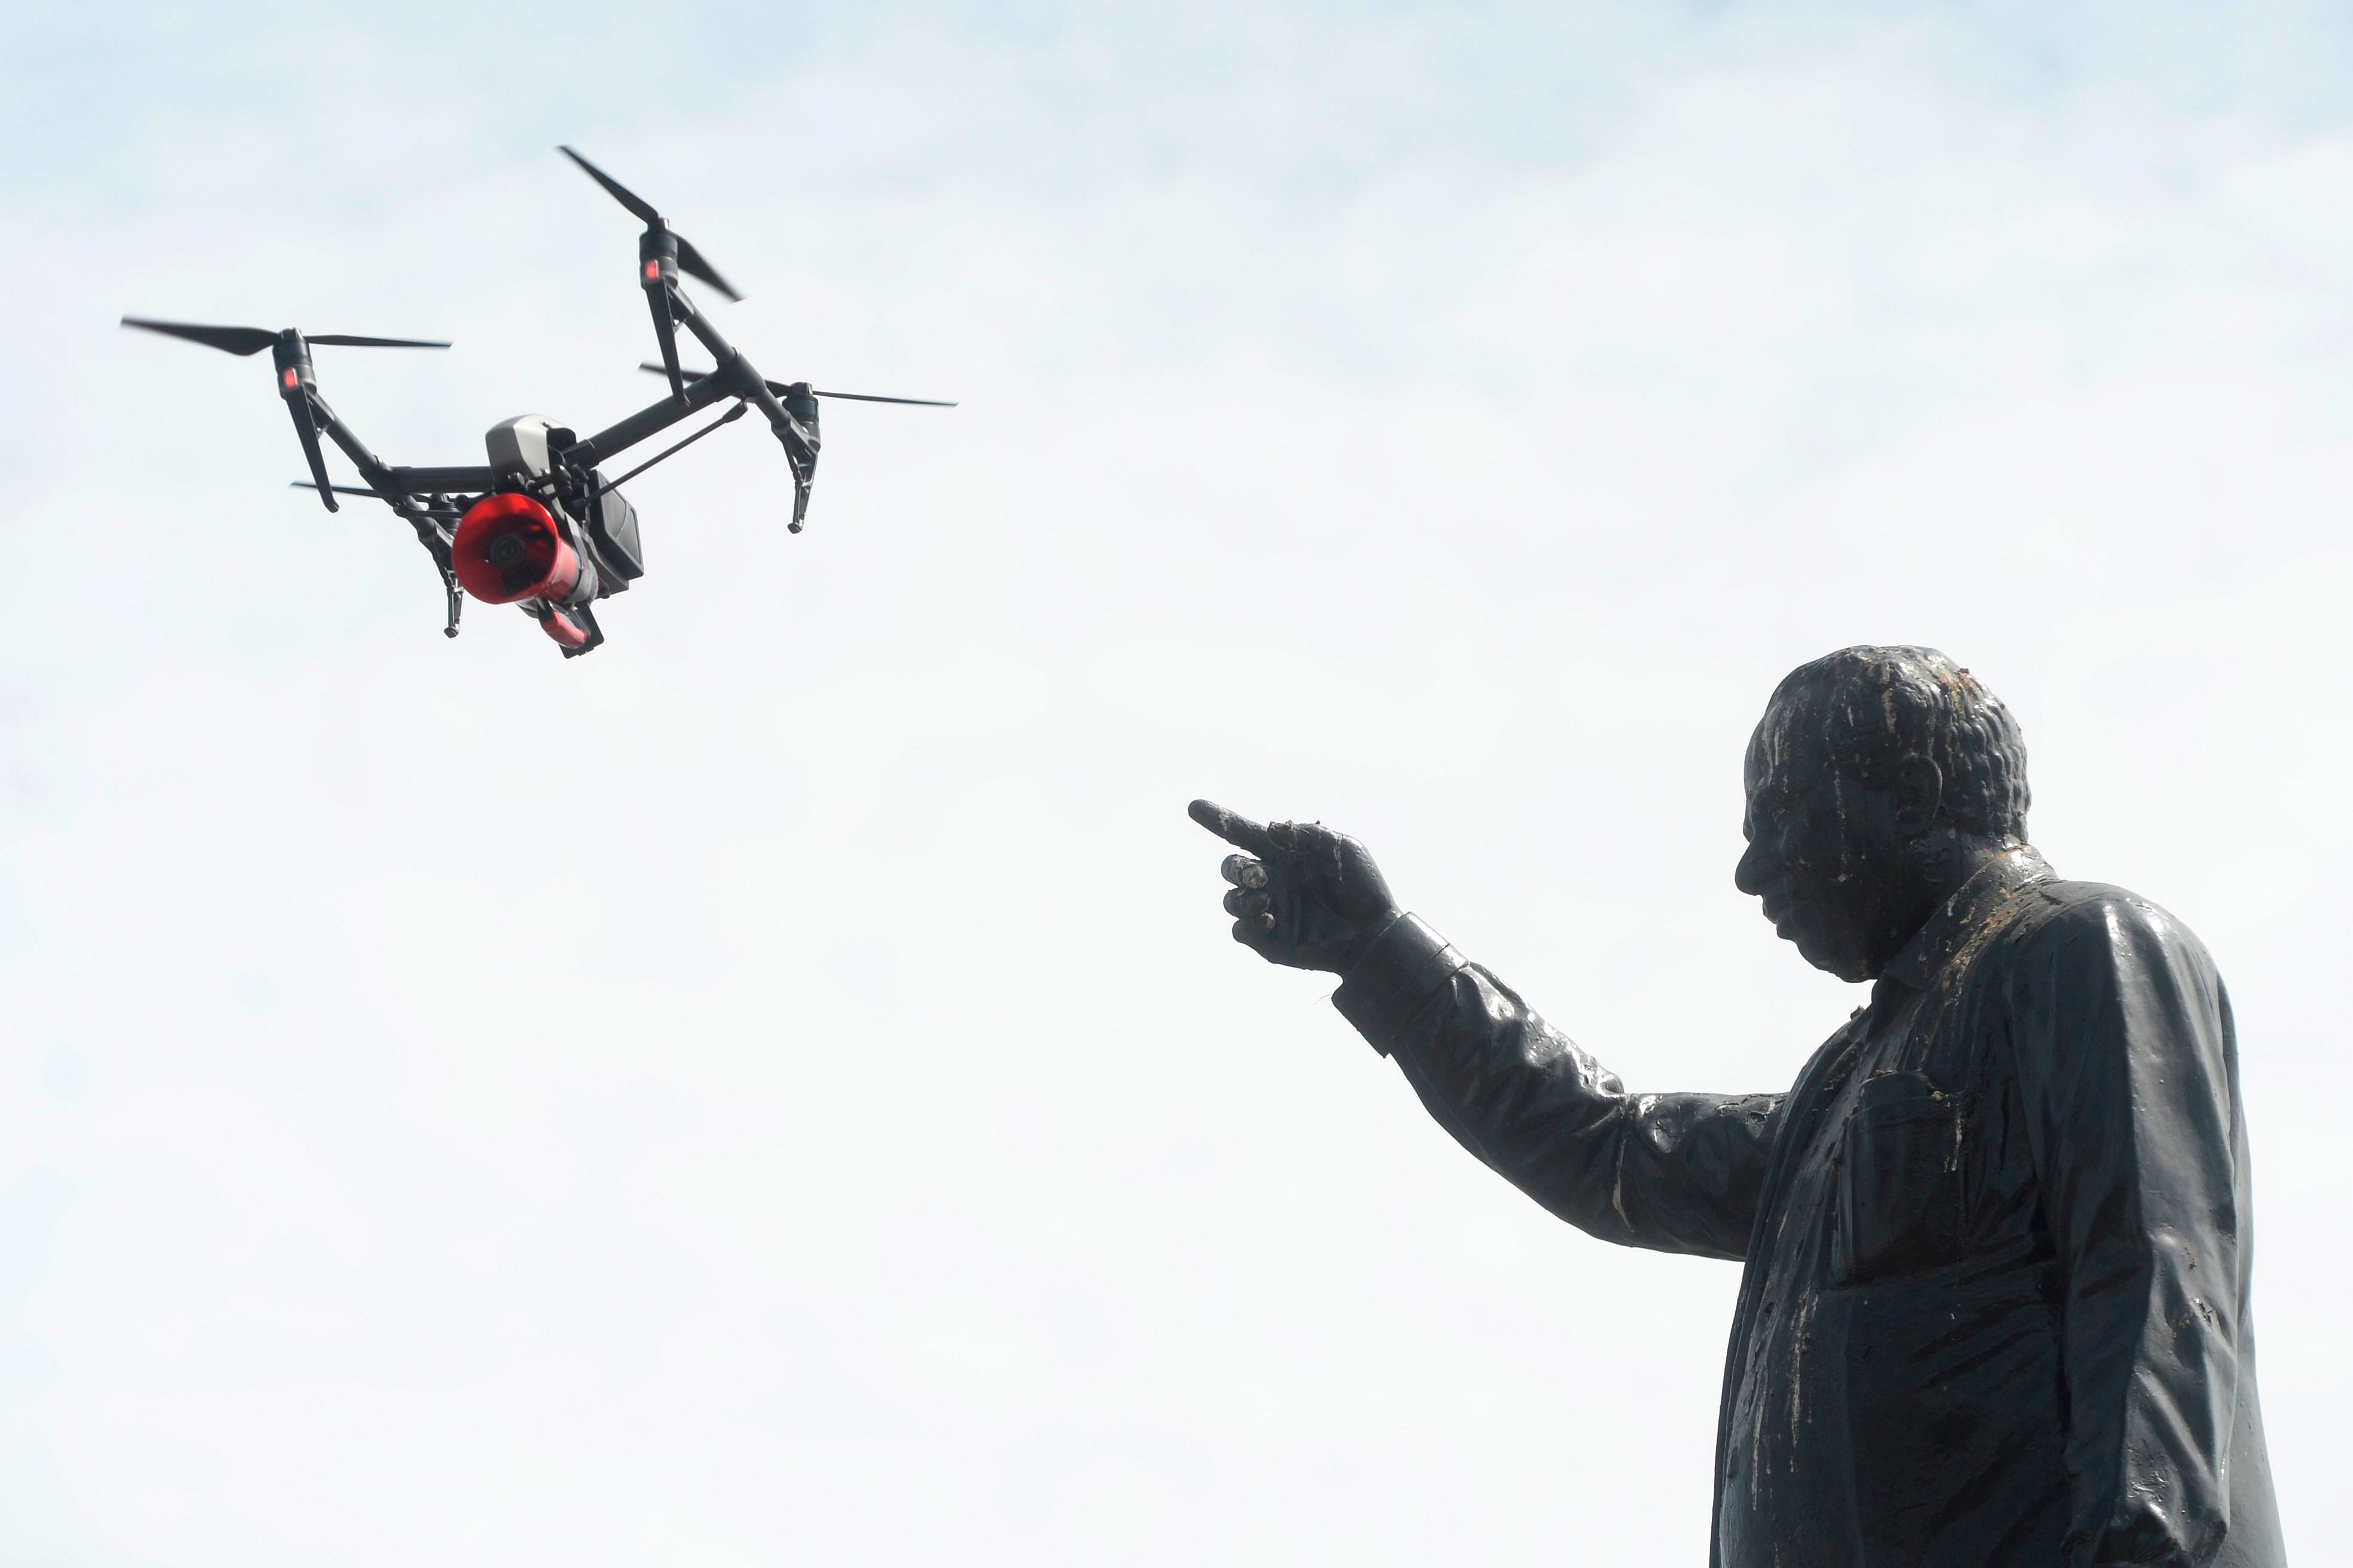 A drone being used by police to monitor activities of people and to spread awareness announcements is pictured next to a statue of late former chief minister of Tamil Nadu C. N. Annadurai, after a lockdown was reimposed as a preventive measure against the spread of the COVID-19, in Chennai on June 19, 2020. (PTI Photo)